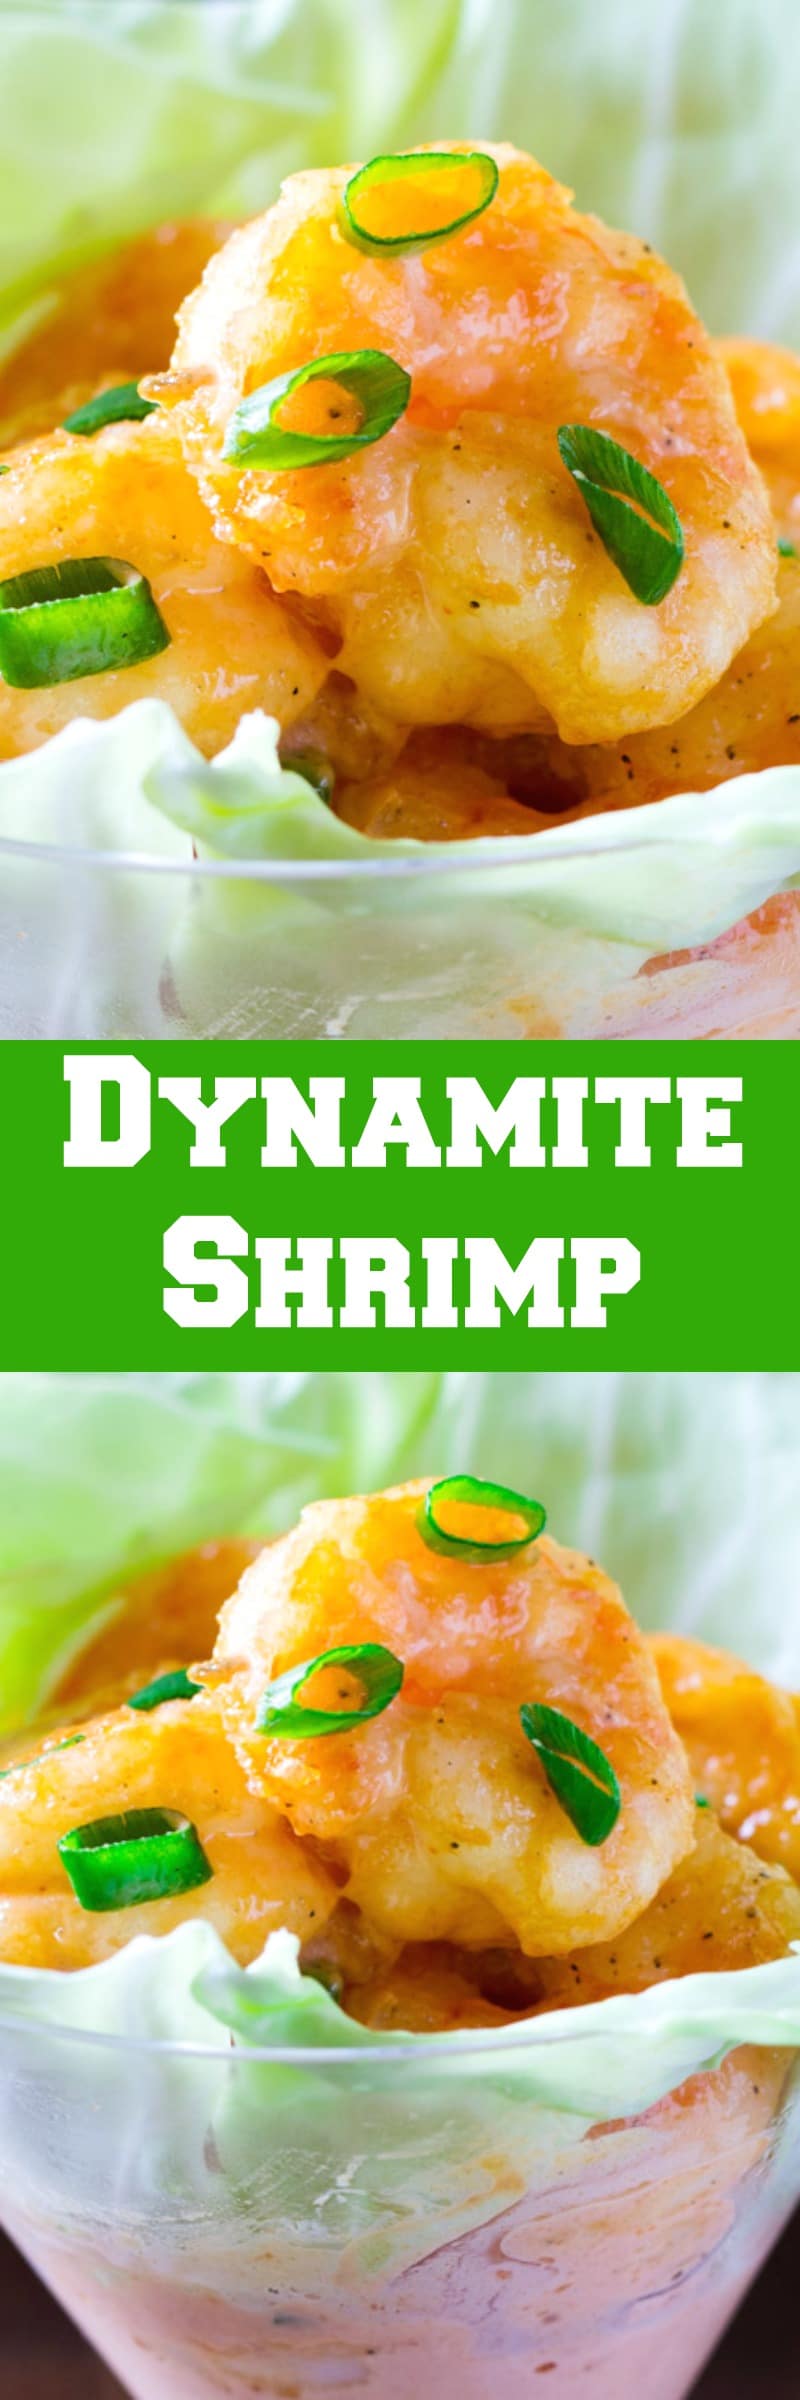 Dynamite Shrimp and sauce in a glass dish.